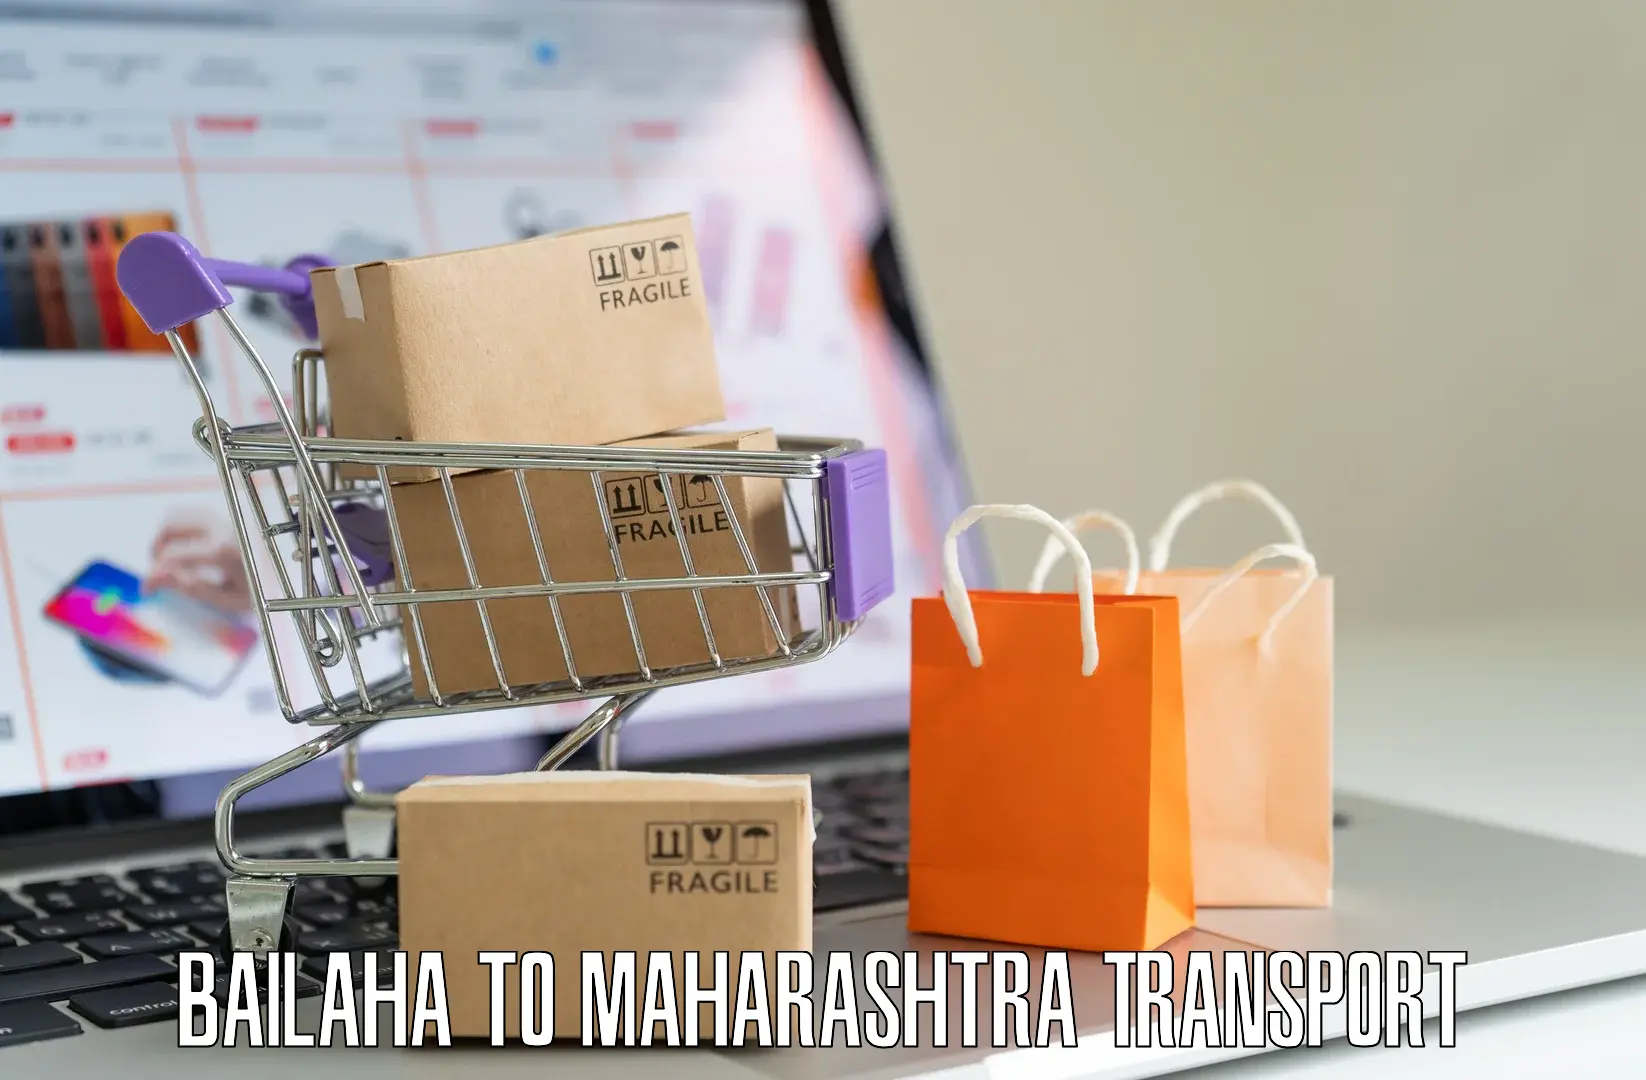 Daily parcel service transport Bailaha to Thane